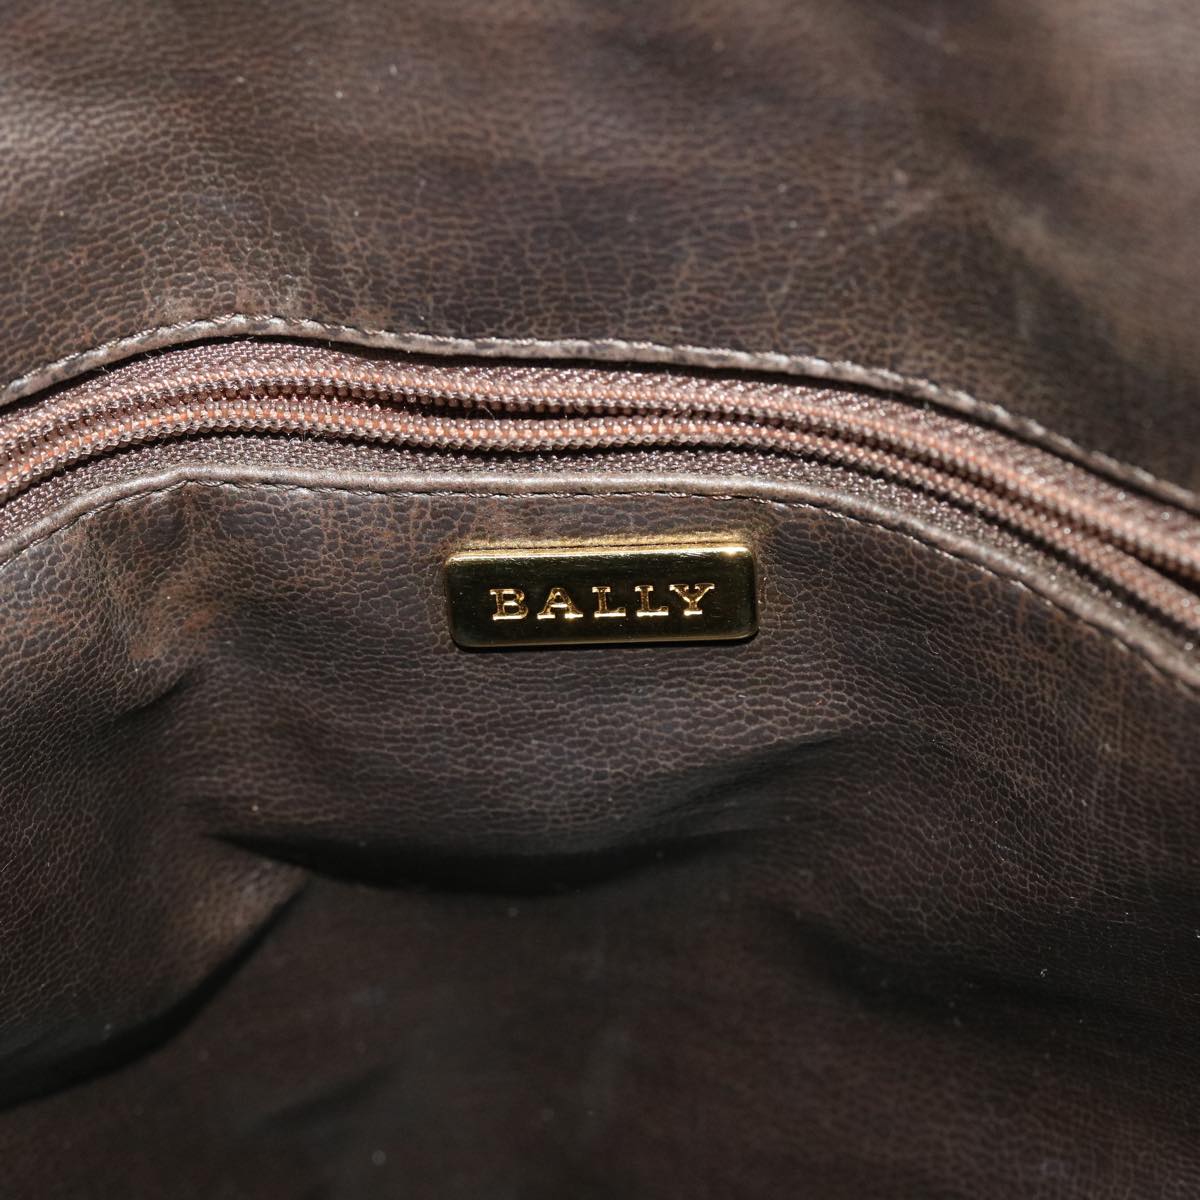 BALLY Hand Bag Leather Brown Auth yk7543B